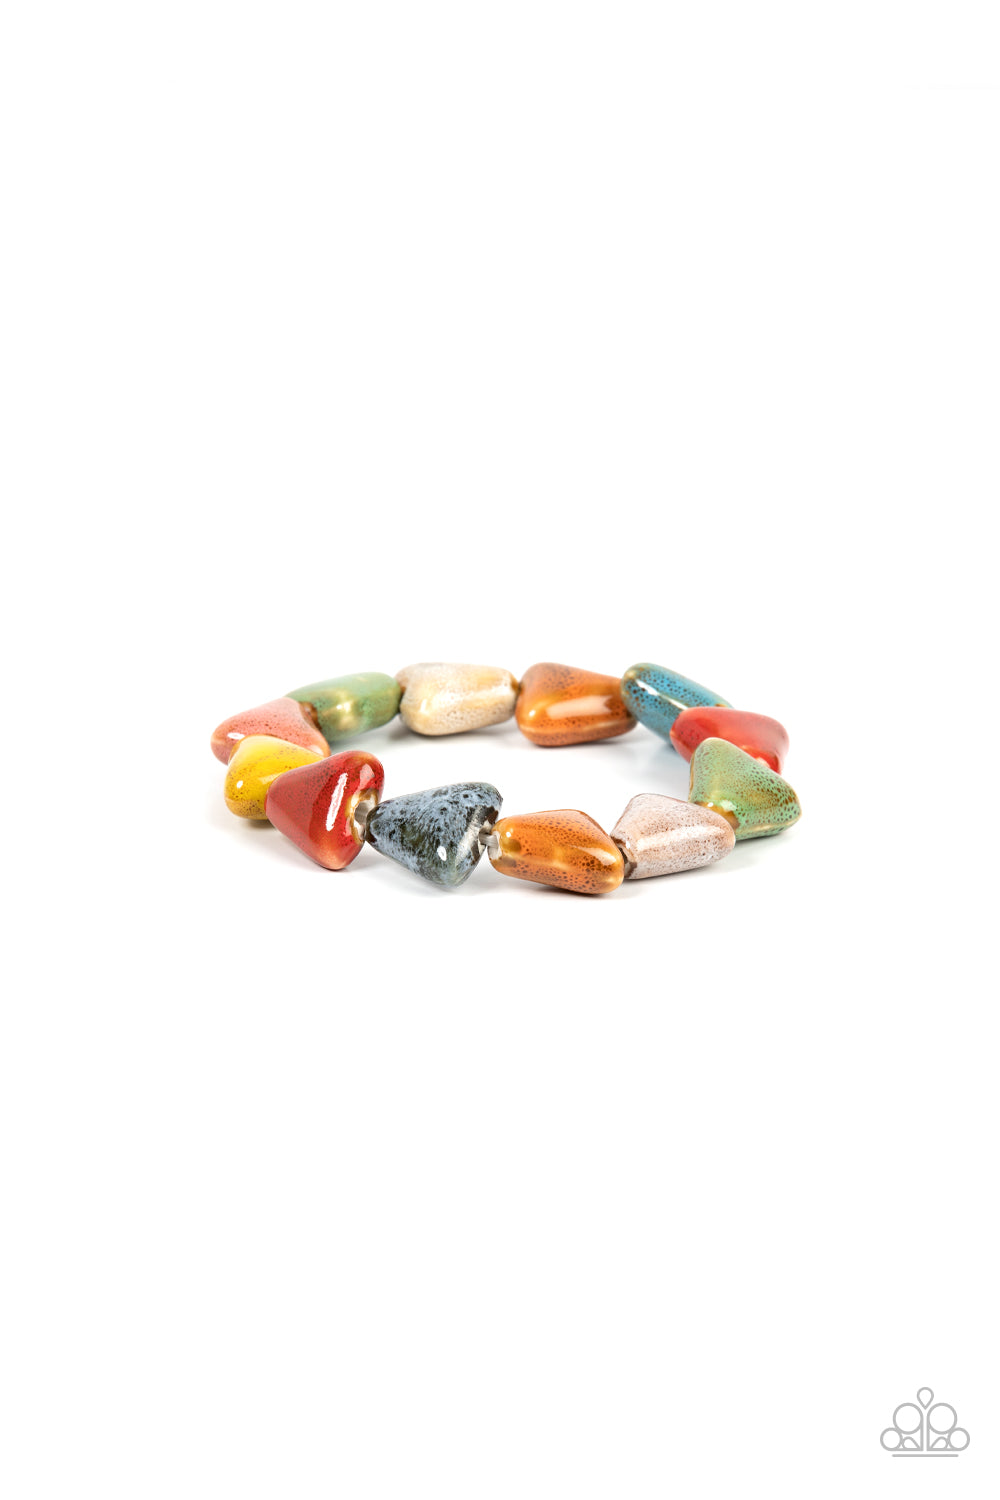 Bracelet - Painted in distressed multicolored finishes, ceramic beads shaped like shark teeth are threaded along a stretchy band around the wrist for a seasonal flair.  Sold as one individual bracelet.